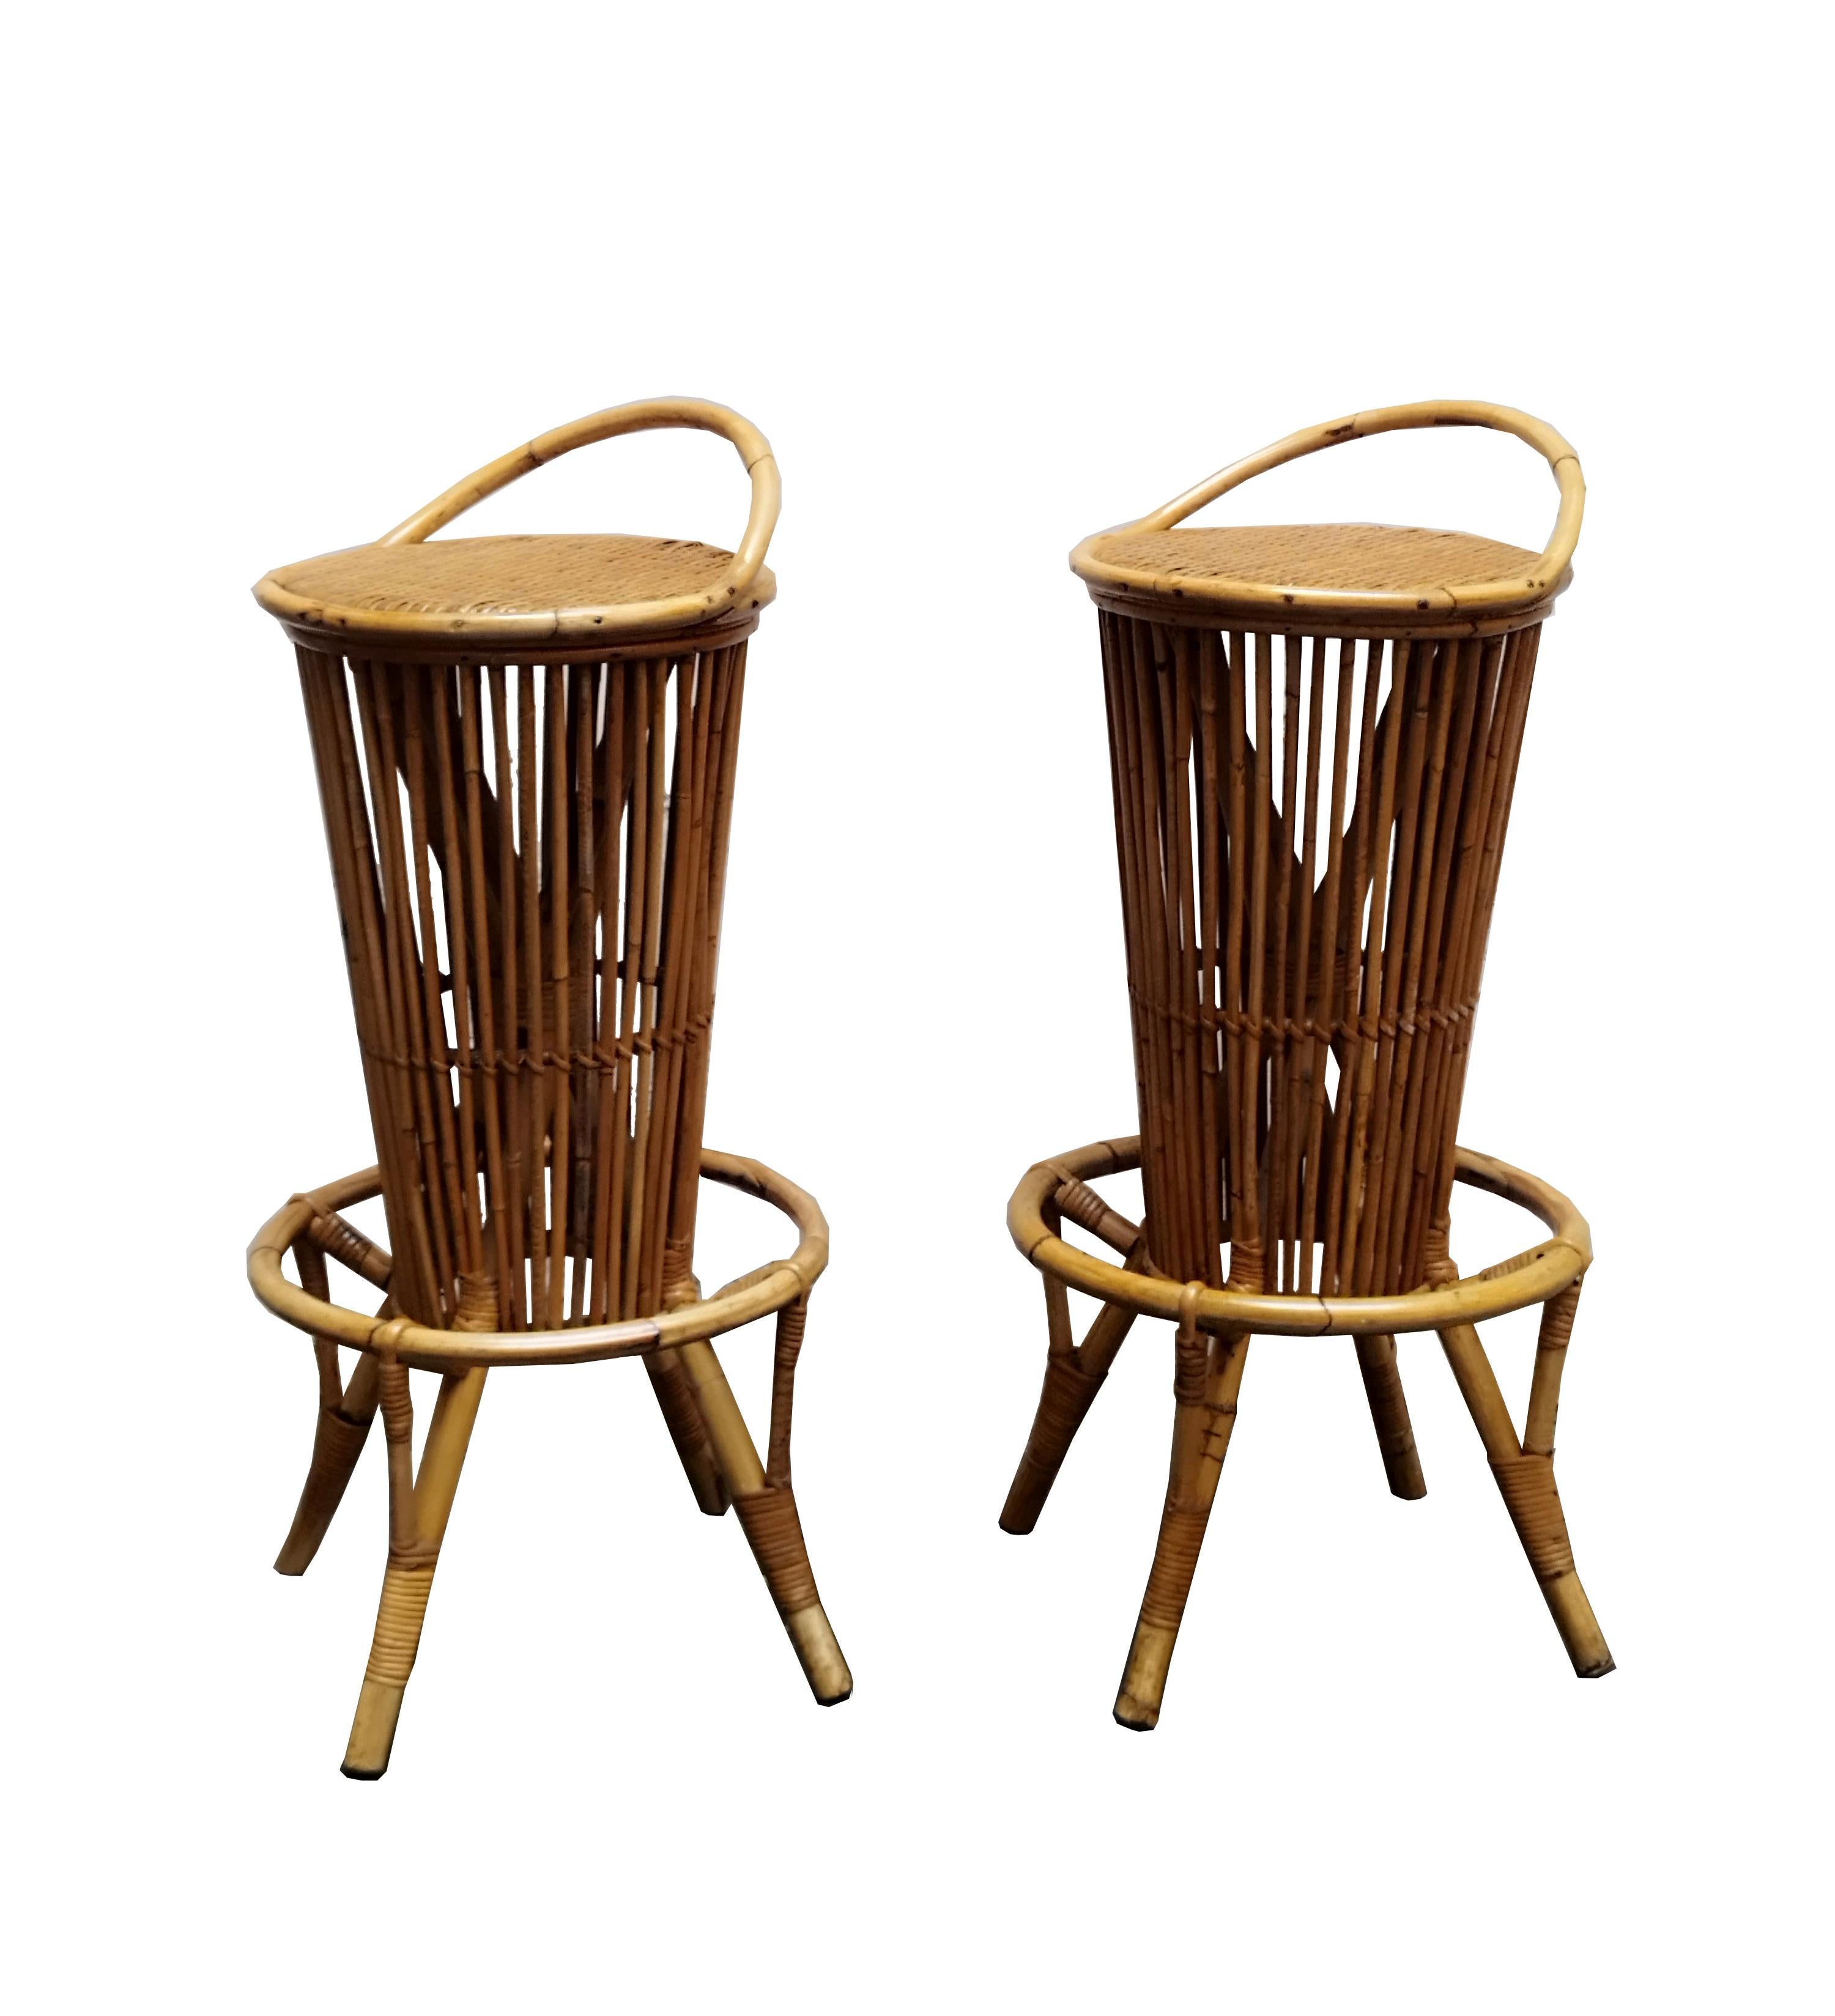 Wonderful pair of stools made of a beautiful mix of bamboo, rattan and wicker. This charming set was designed by Tito Agnoli and made in Italy in the 1960s. Completely original and in spectacular condition.This pair of stools of exceptional quality,